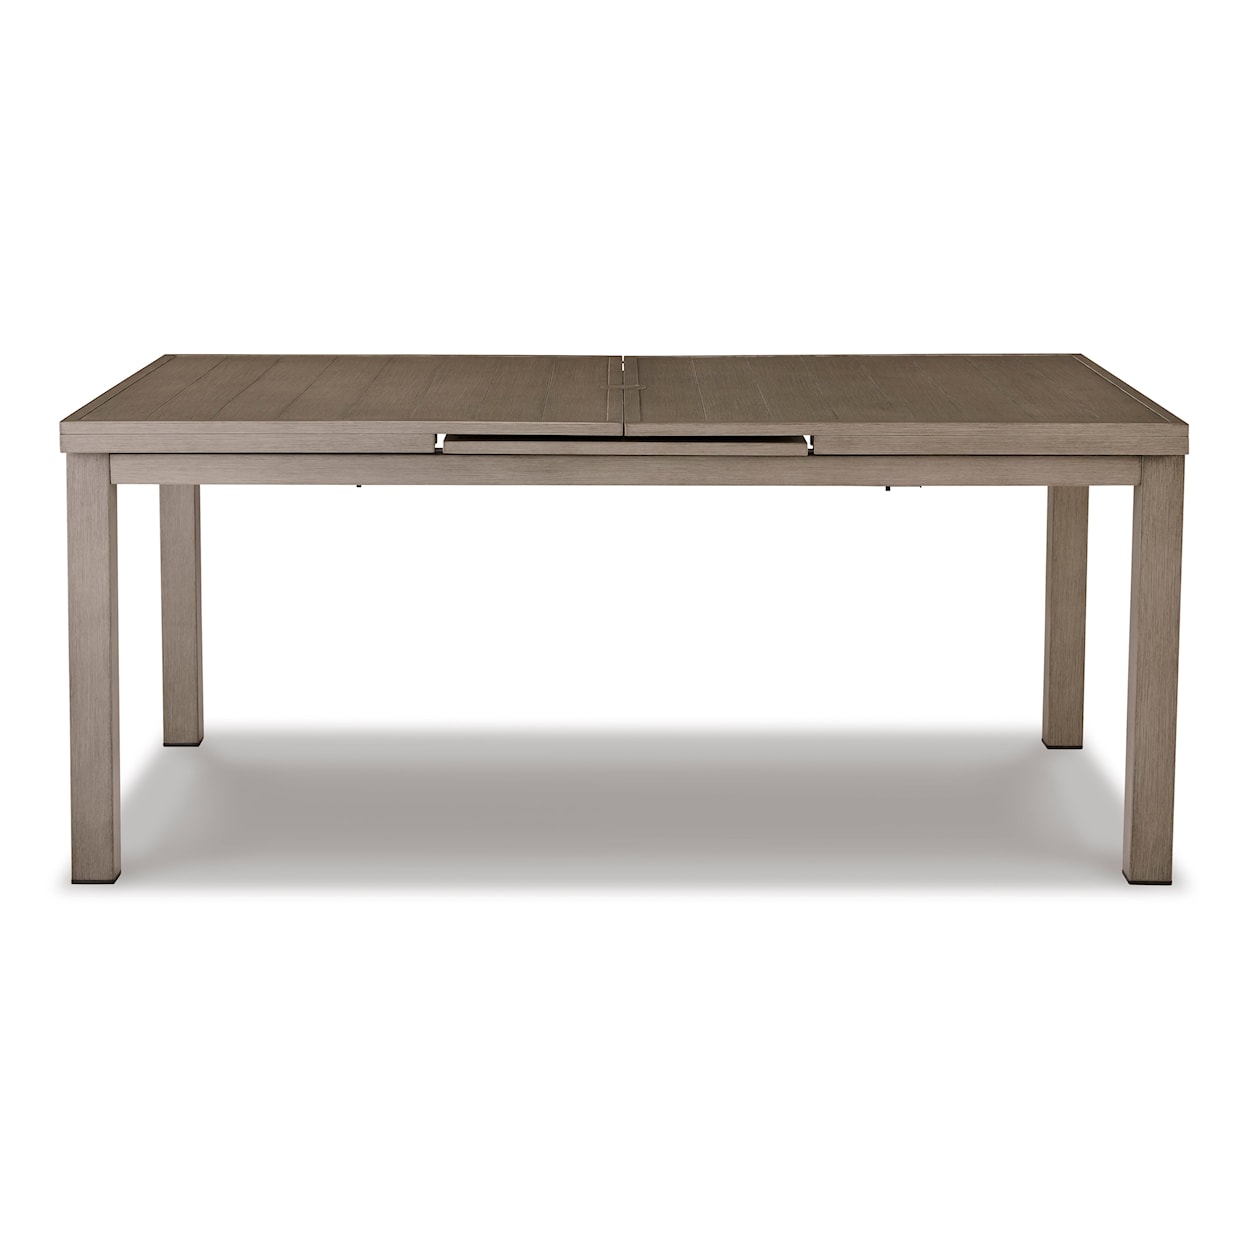 Michael Alan Select Beach Front Outdoor Dining Table